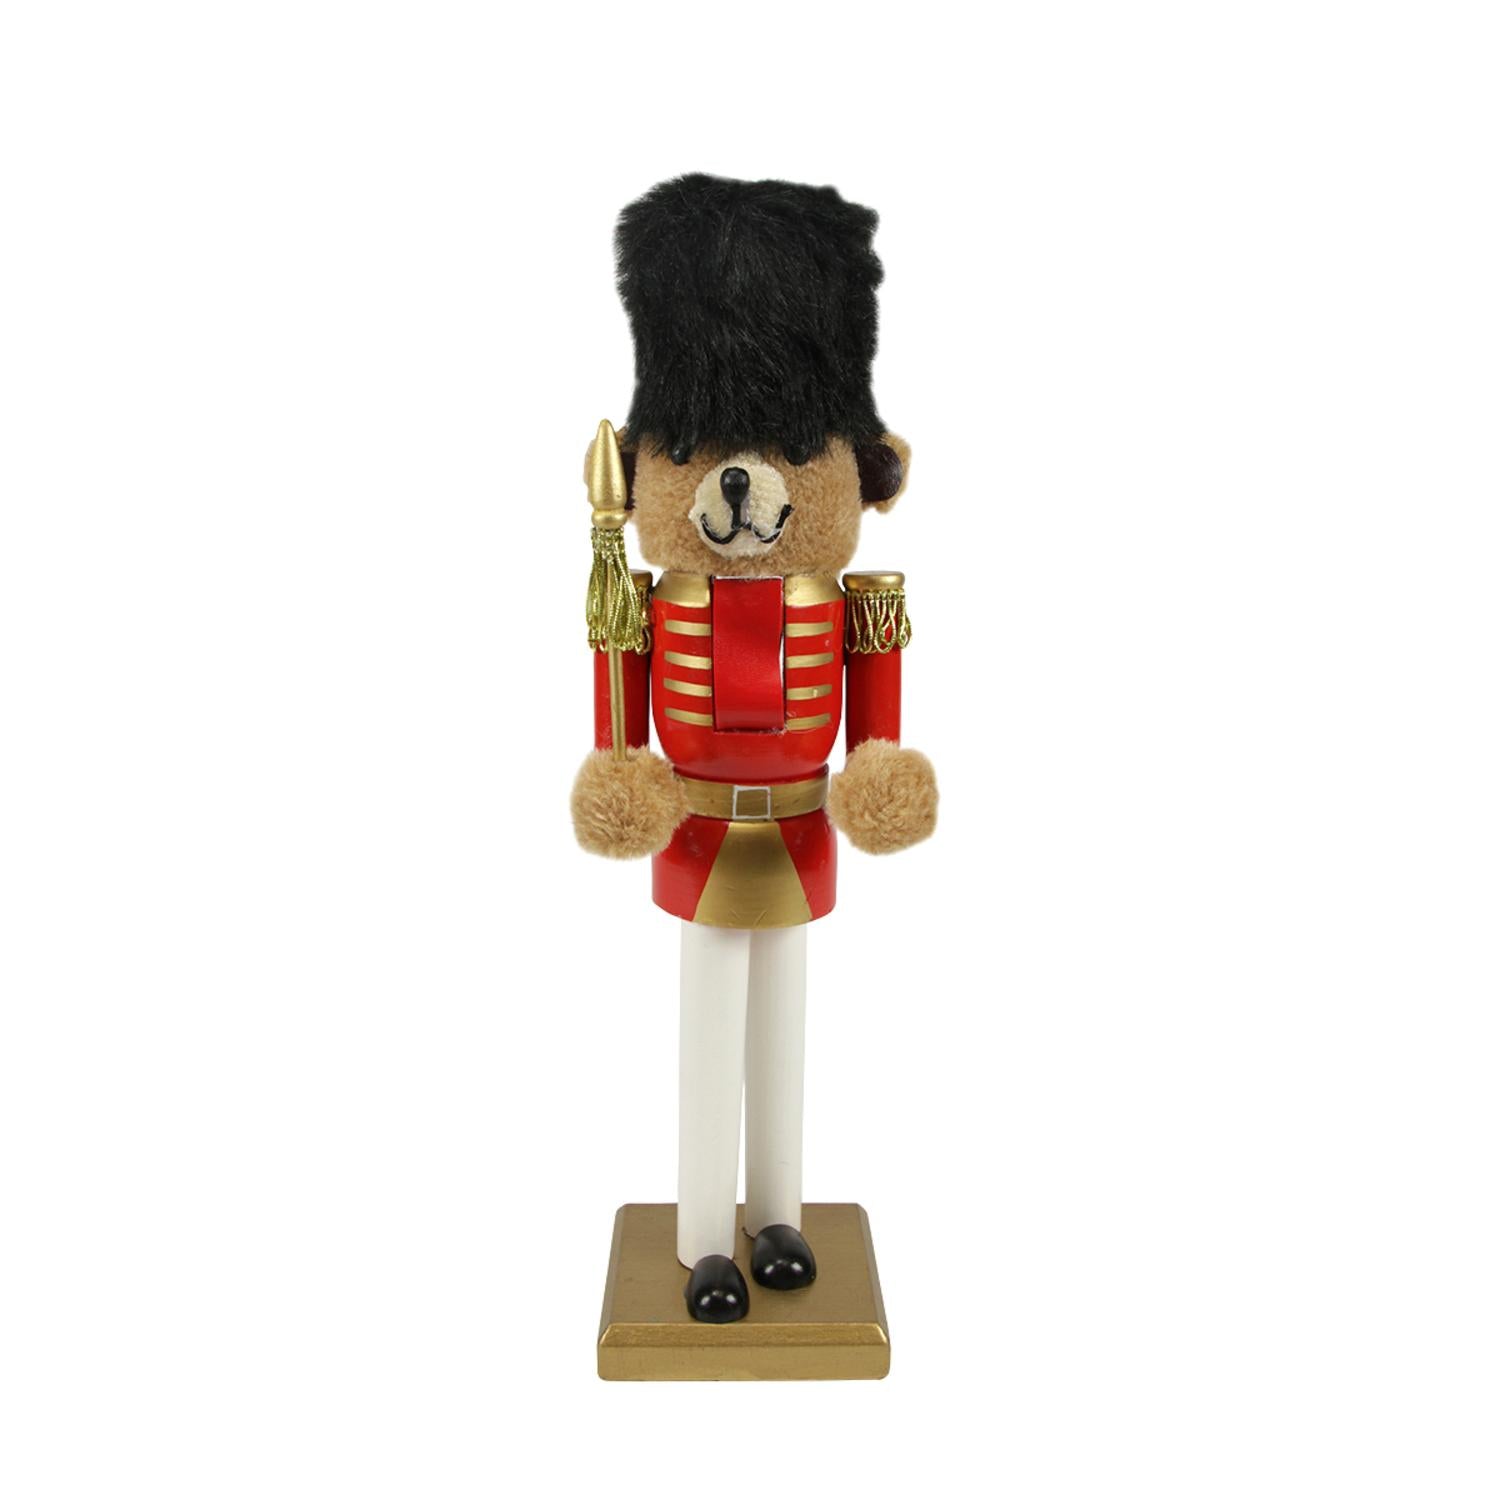 14.25" Red and Gold Wooden Christmas Nutcracker Bear Soldier